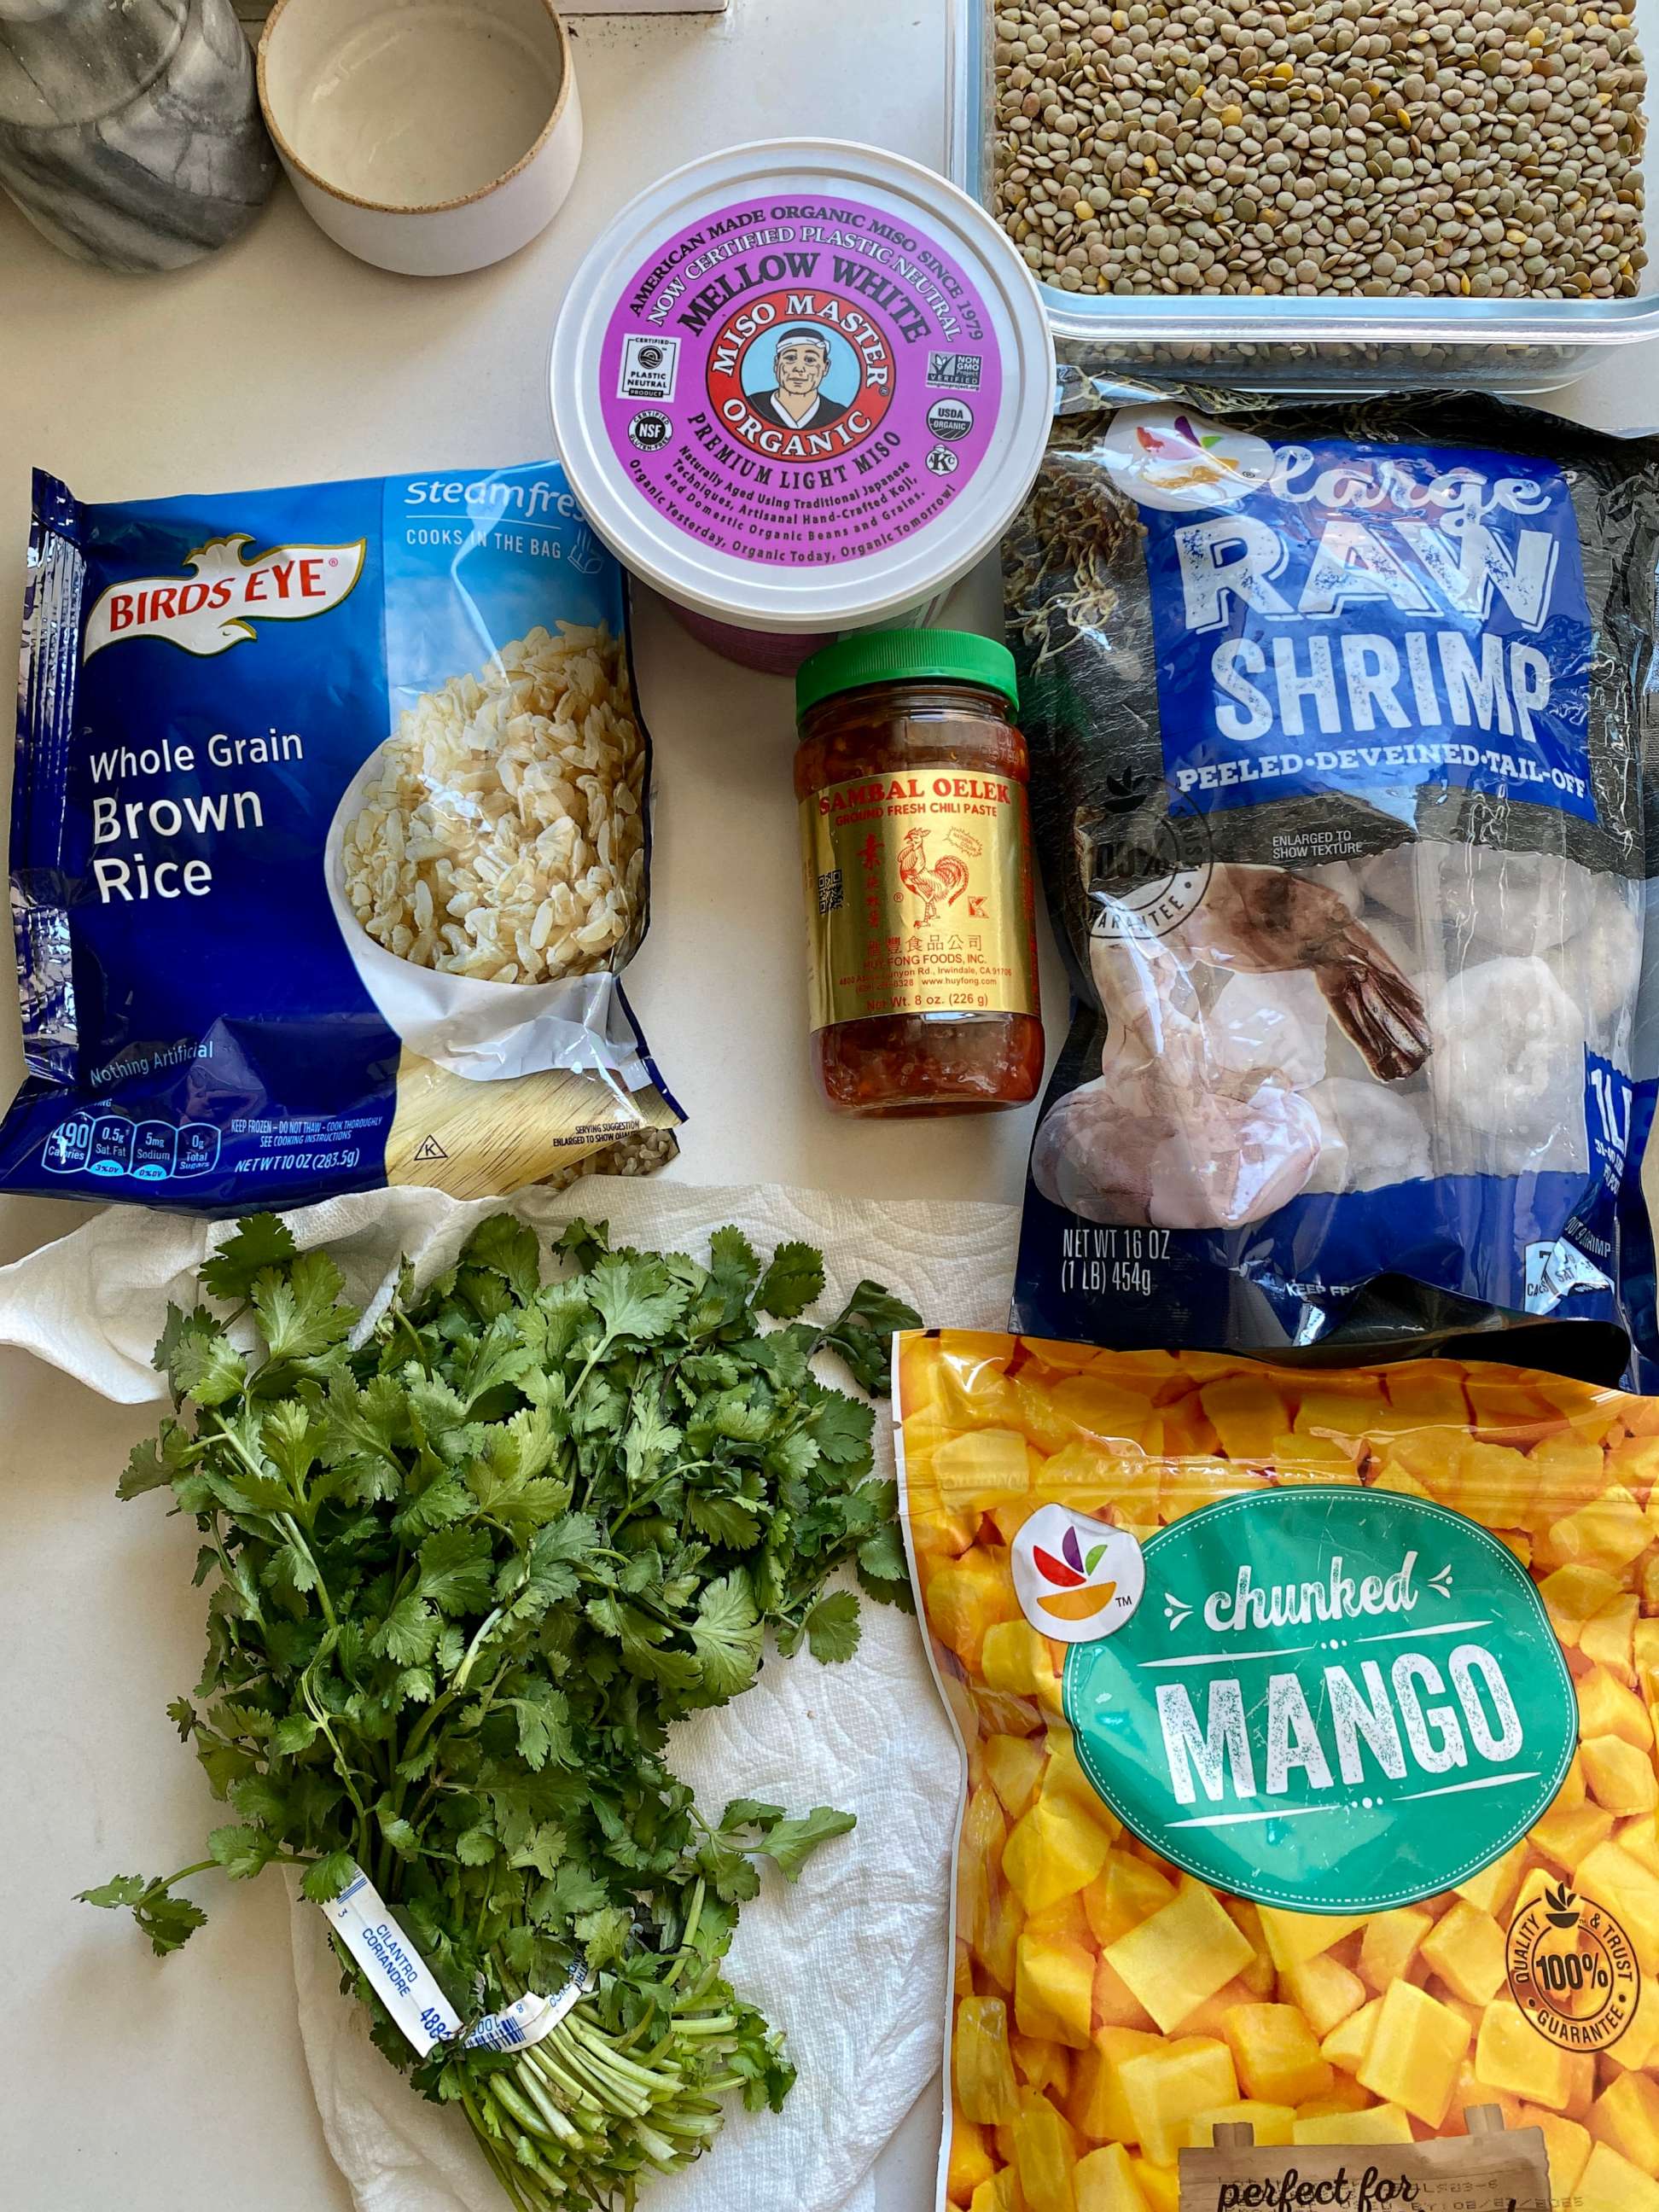 PHOTO: A mix of ingredients used in a recipe created by ChatGPT.